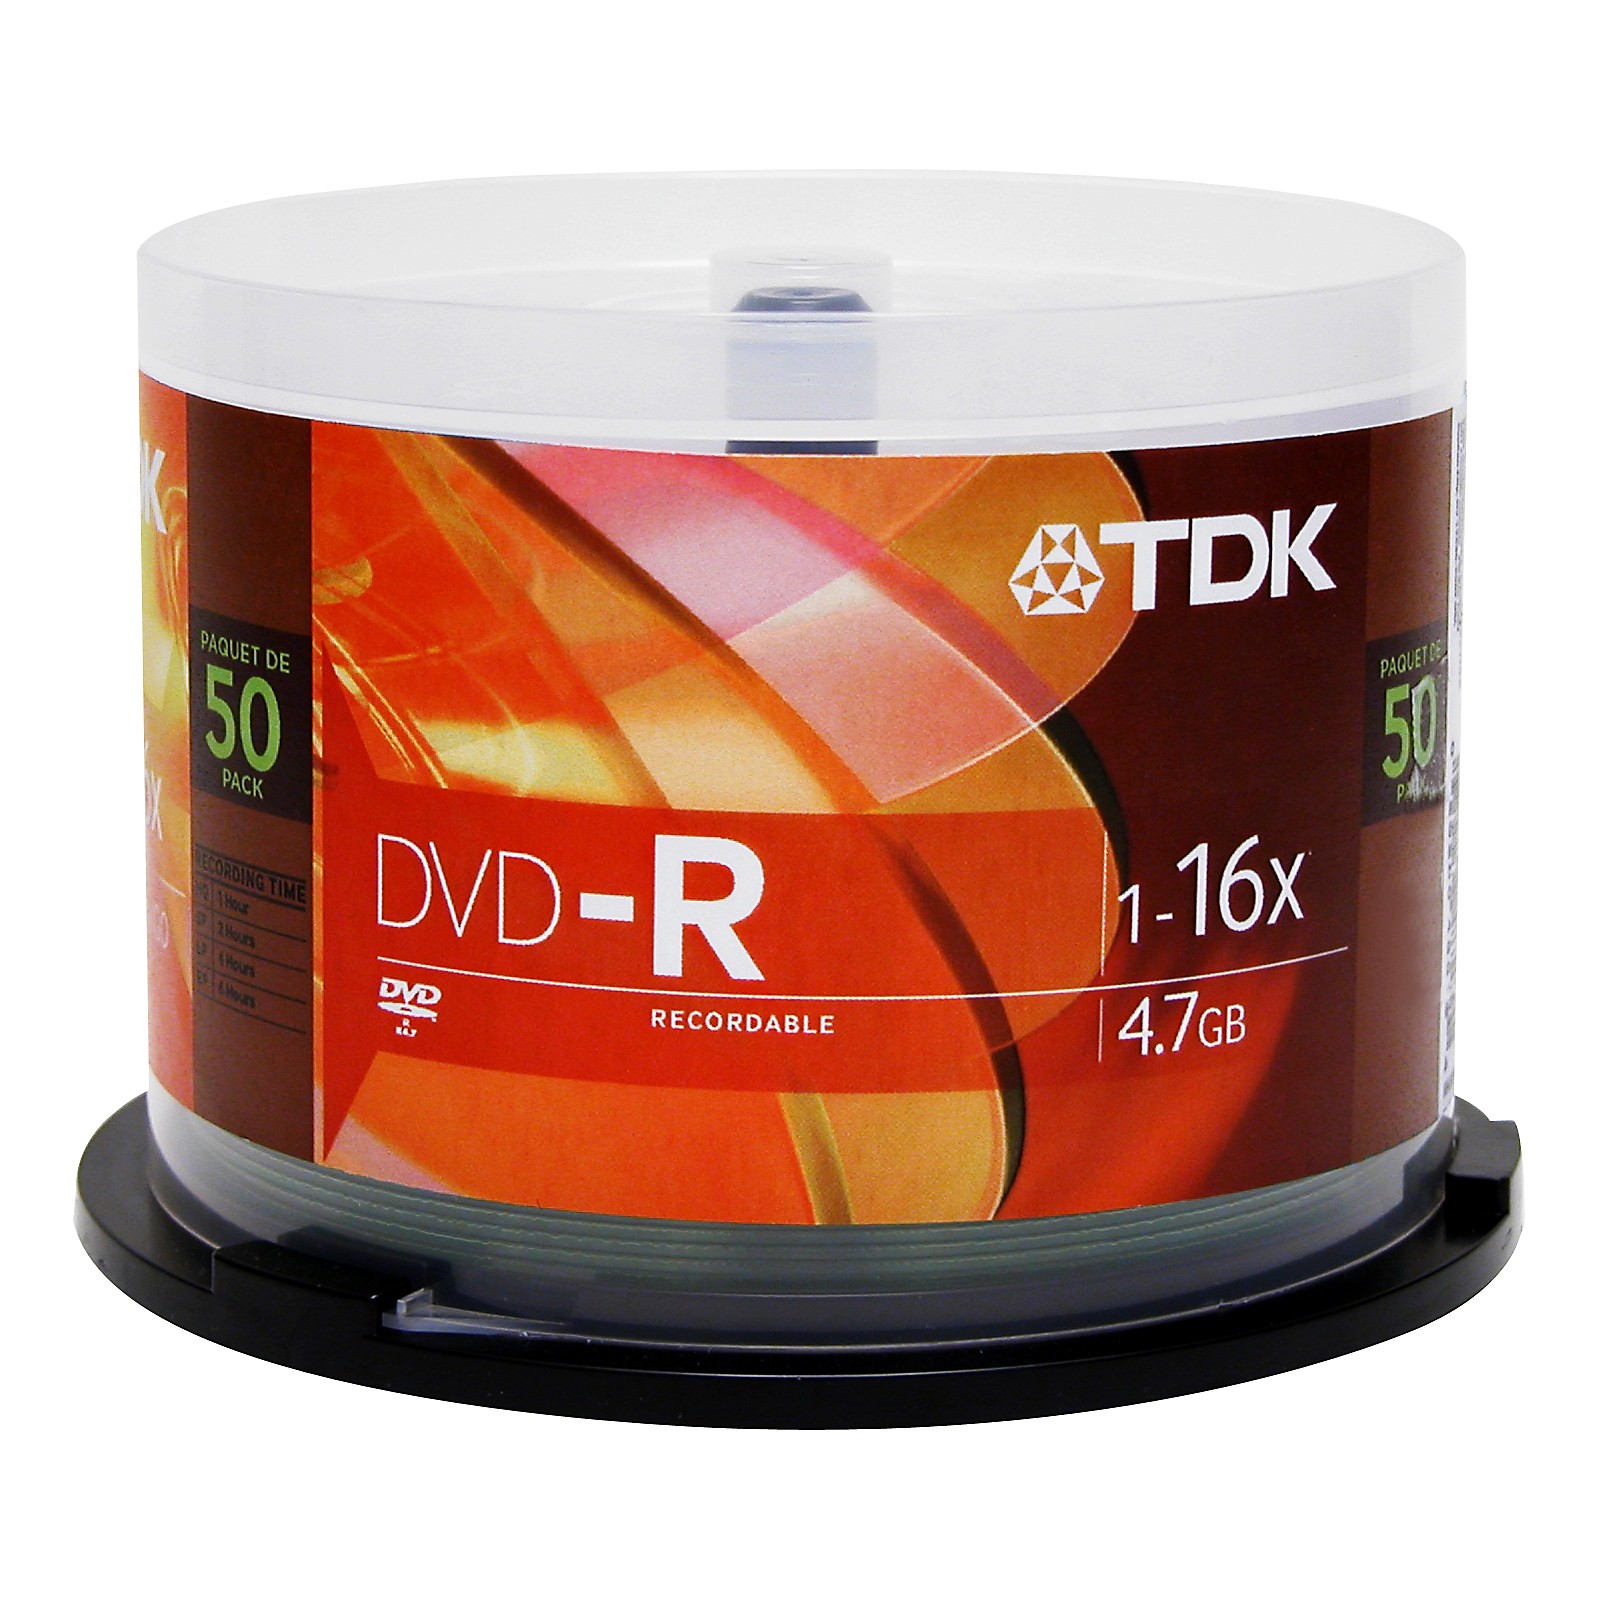 Tdk Dvd R 4 7gb 120 Minute 16x 50 Pack Spindle Musicians Friend